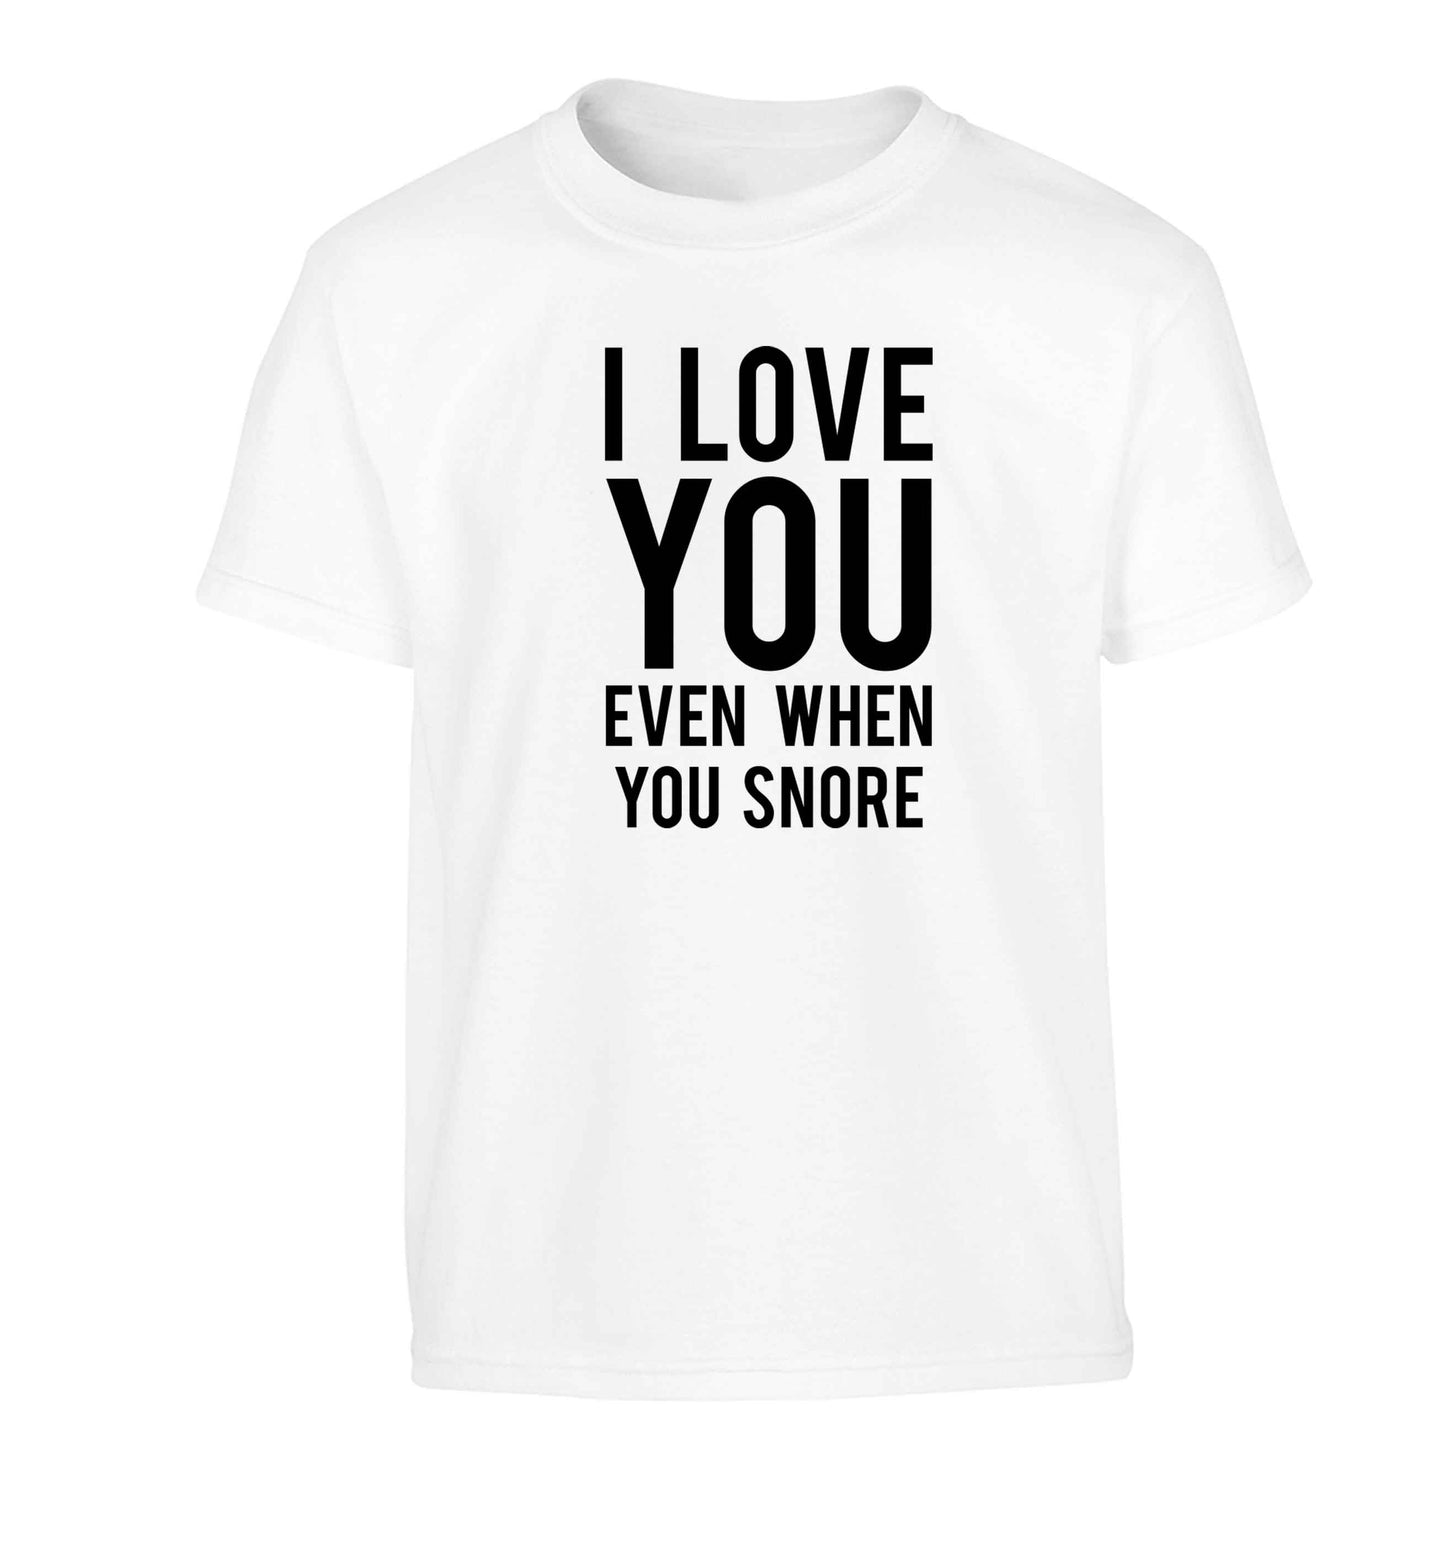 I love you even when you snore Children's white Tshirt 12-13 Years